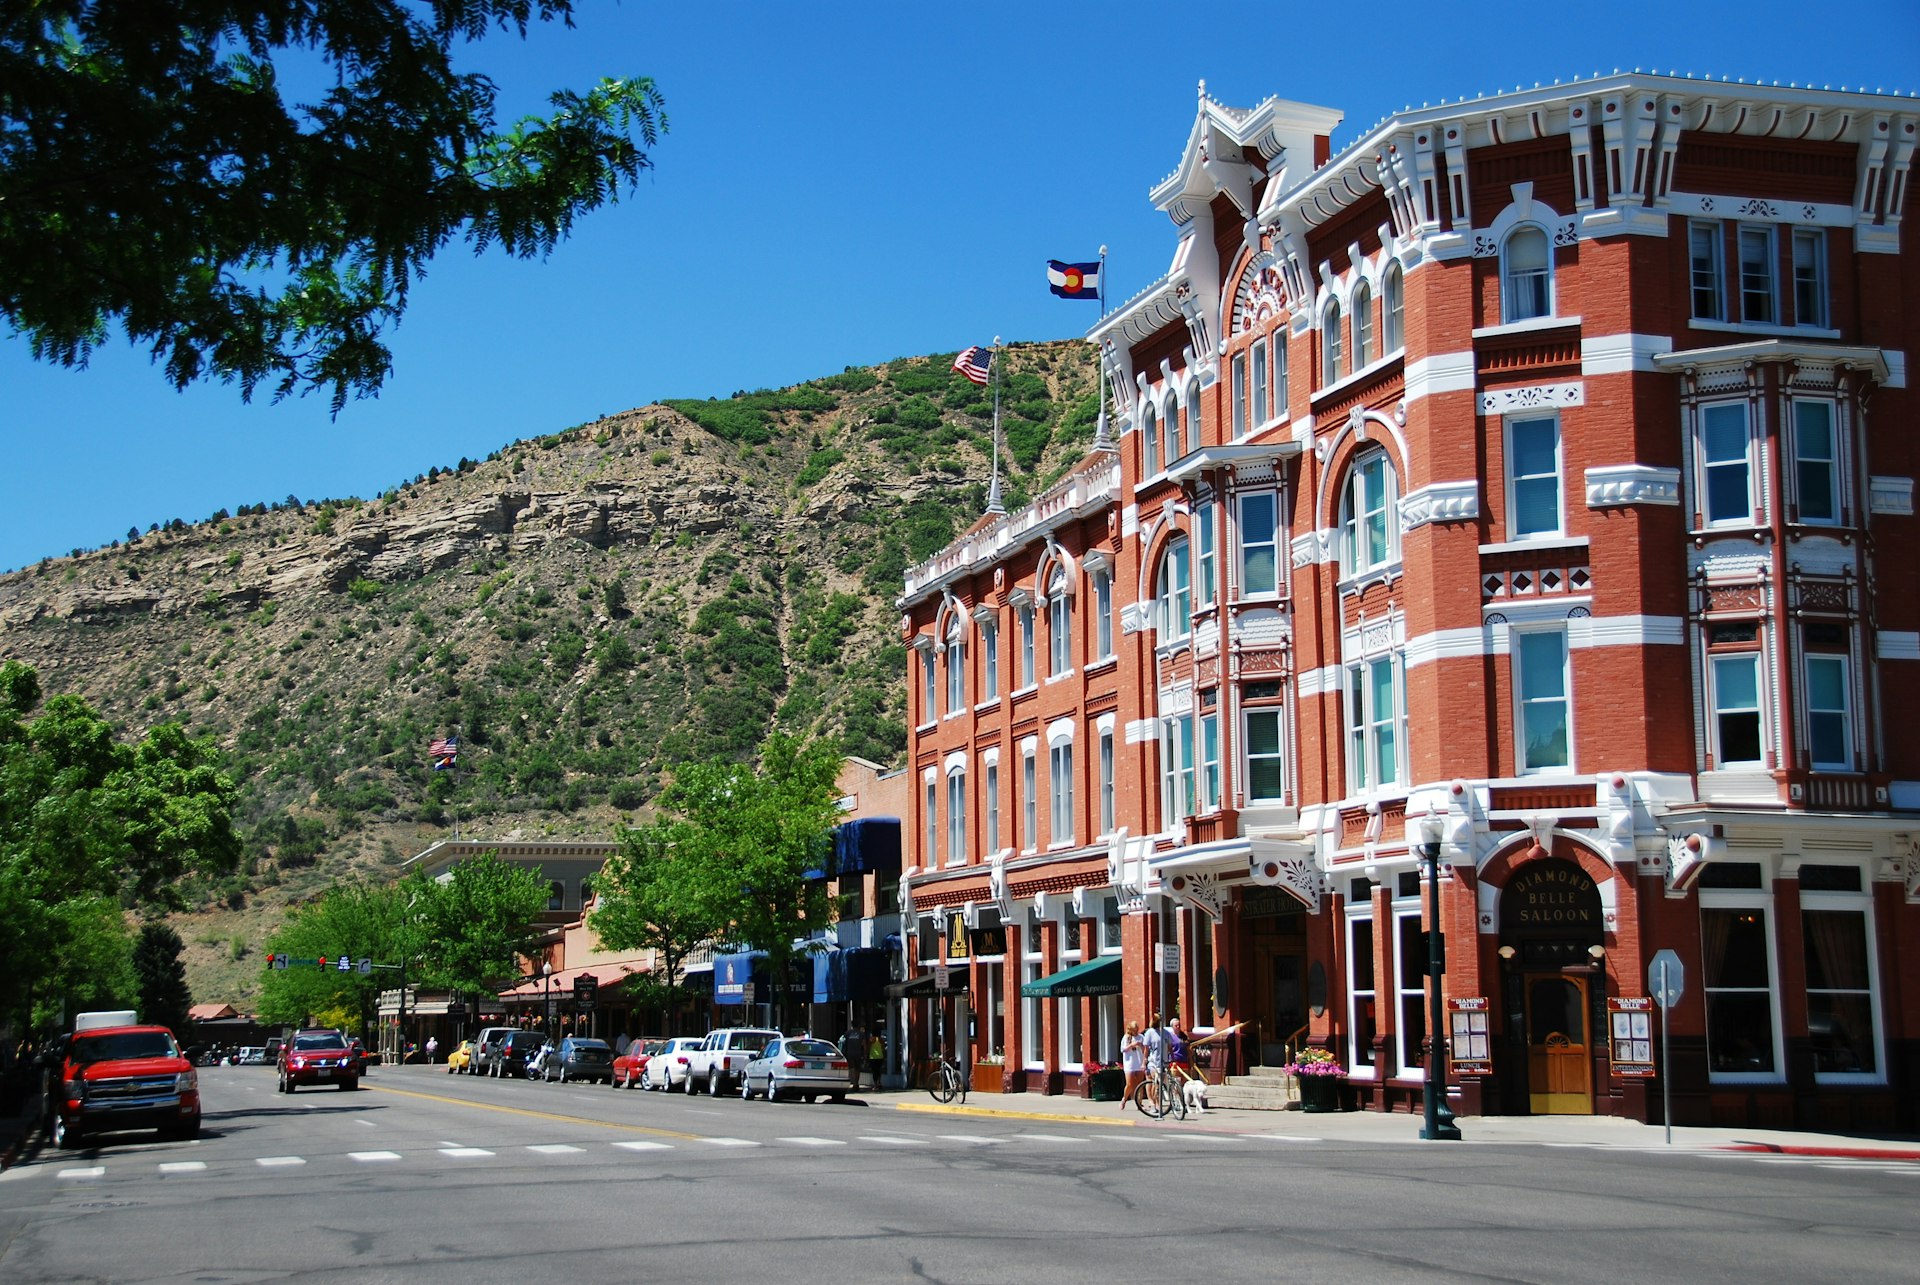  A view of Main Avenue in Durango, featuring Strater hotel. The historic district of Durango is home to more than 80 historic buildings.